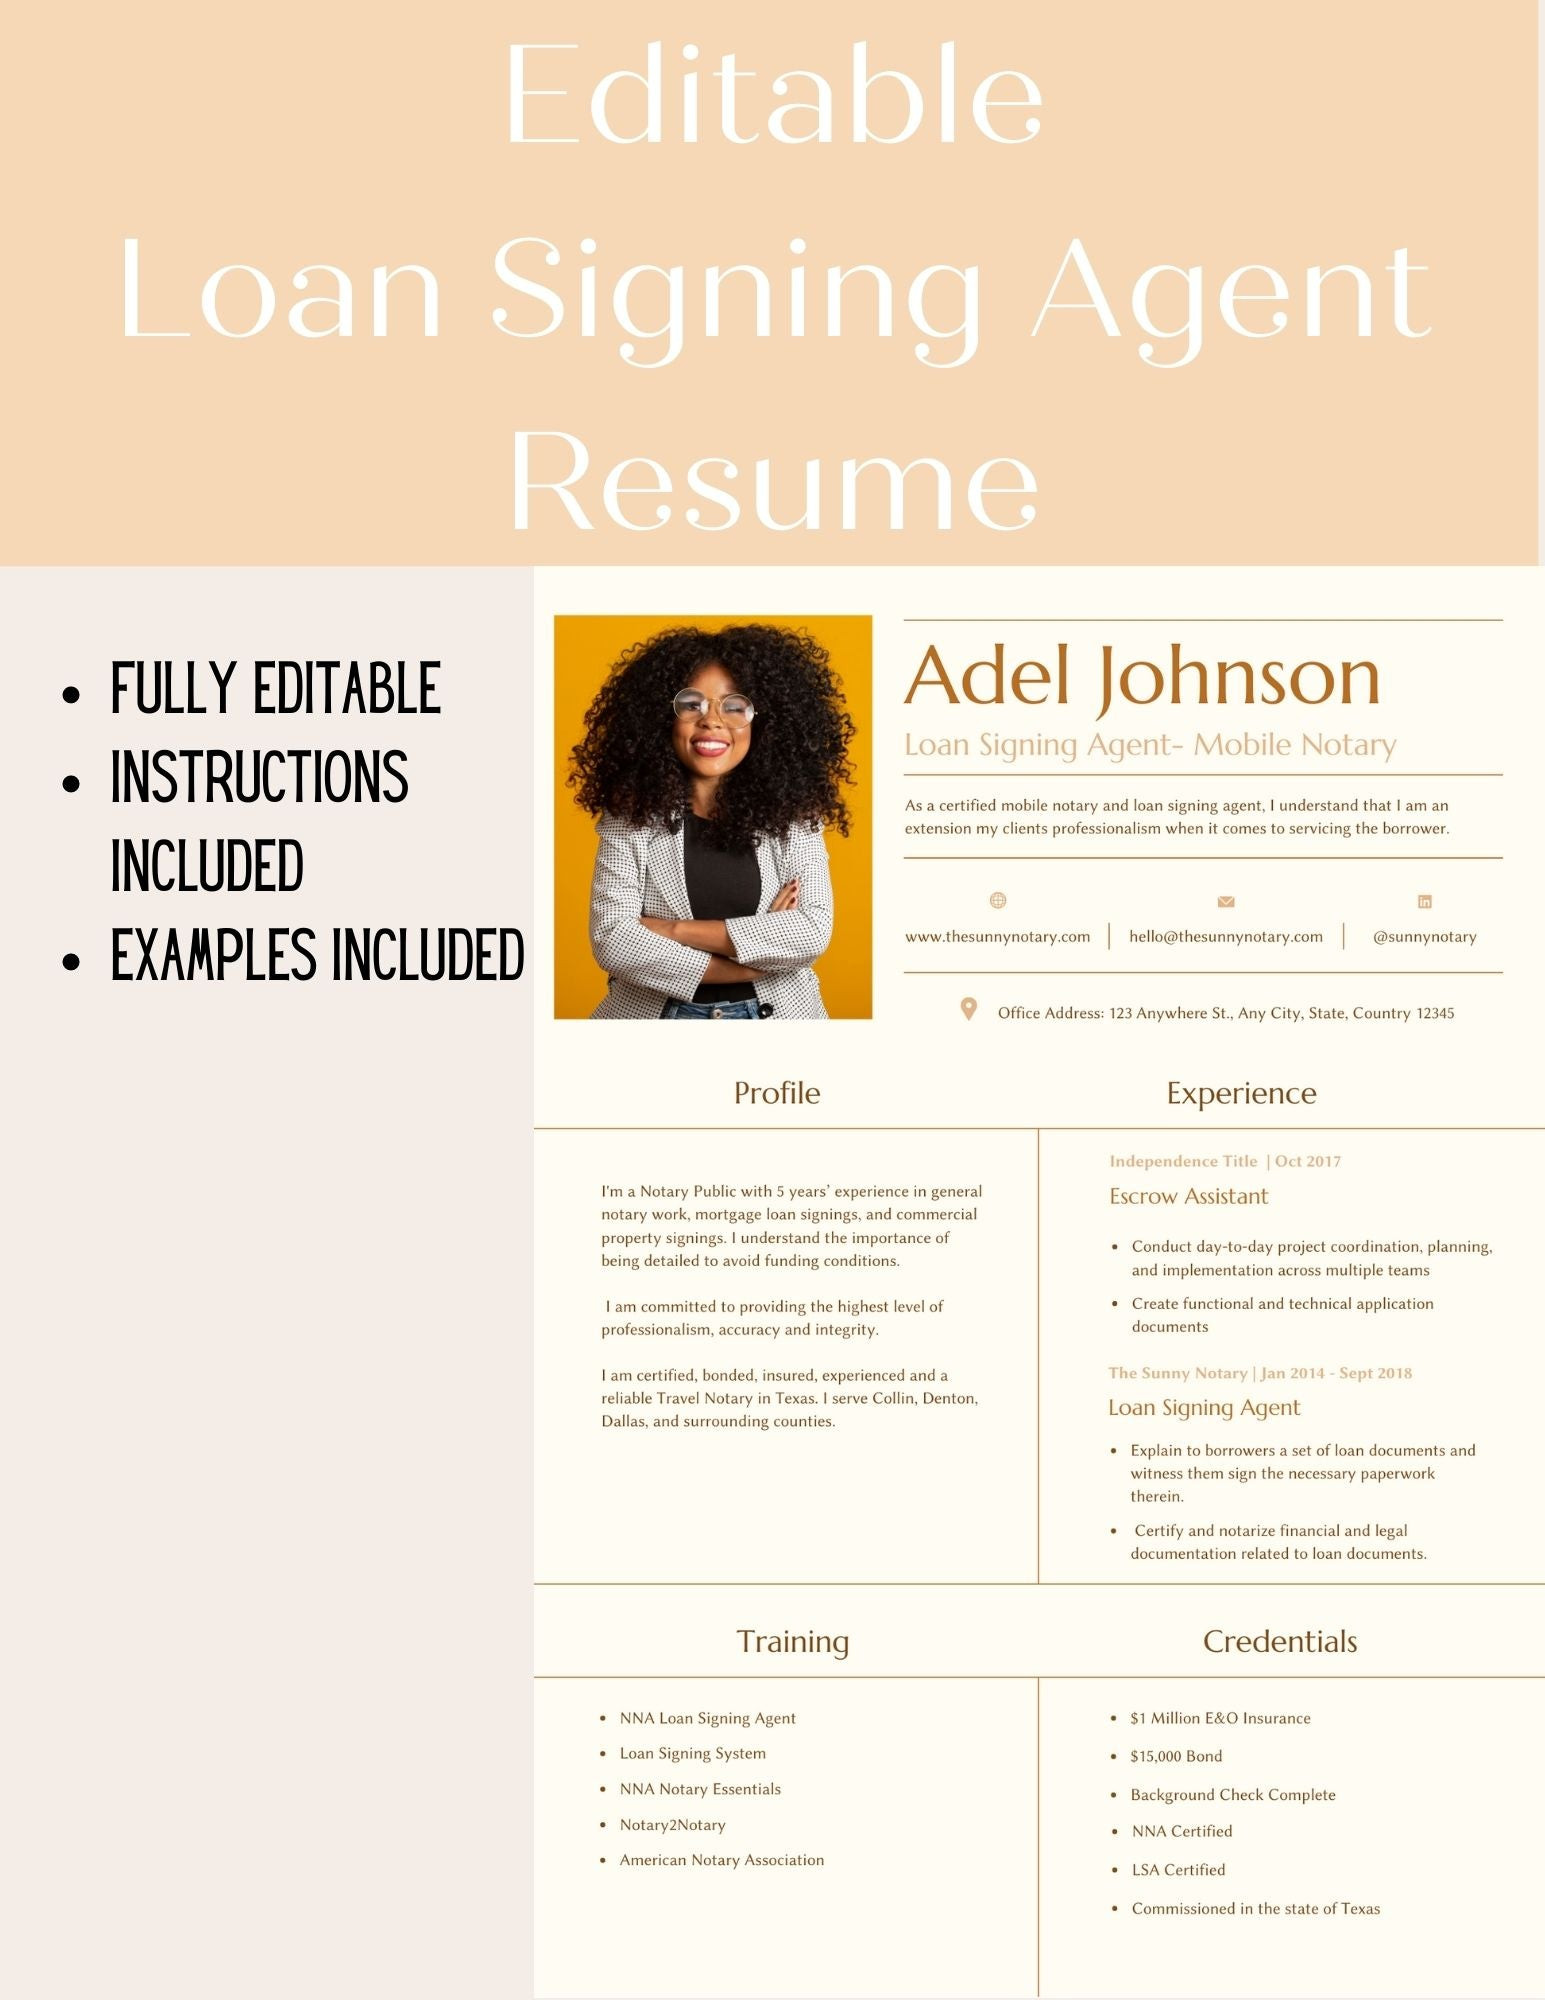 Sample Resume for Notary Signing Agent Editable Loan Signing Agent Resume